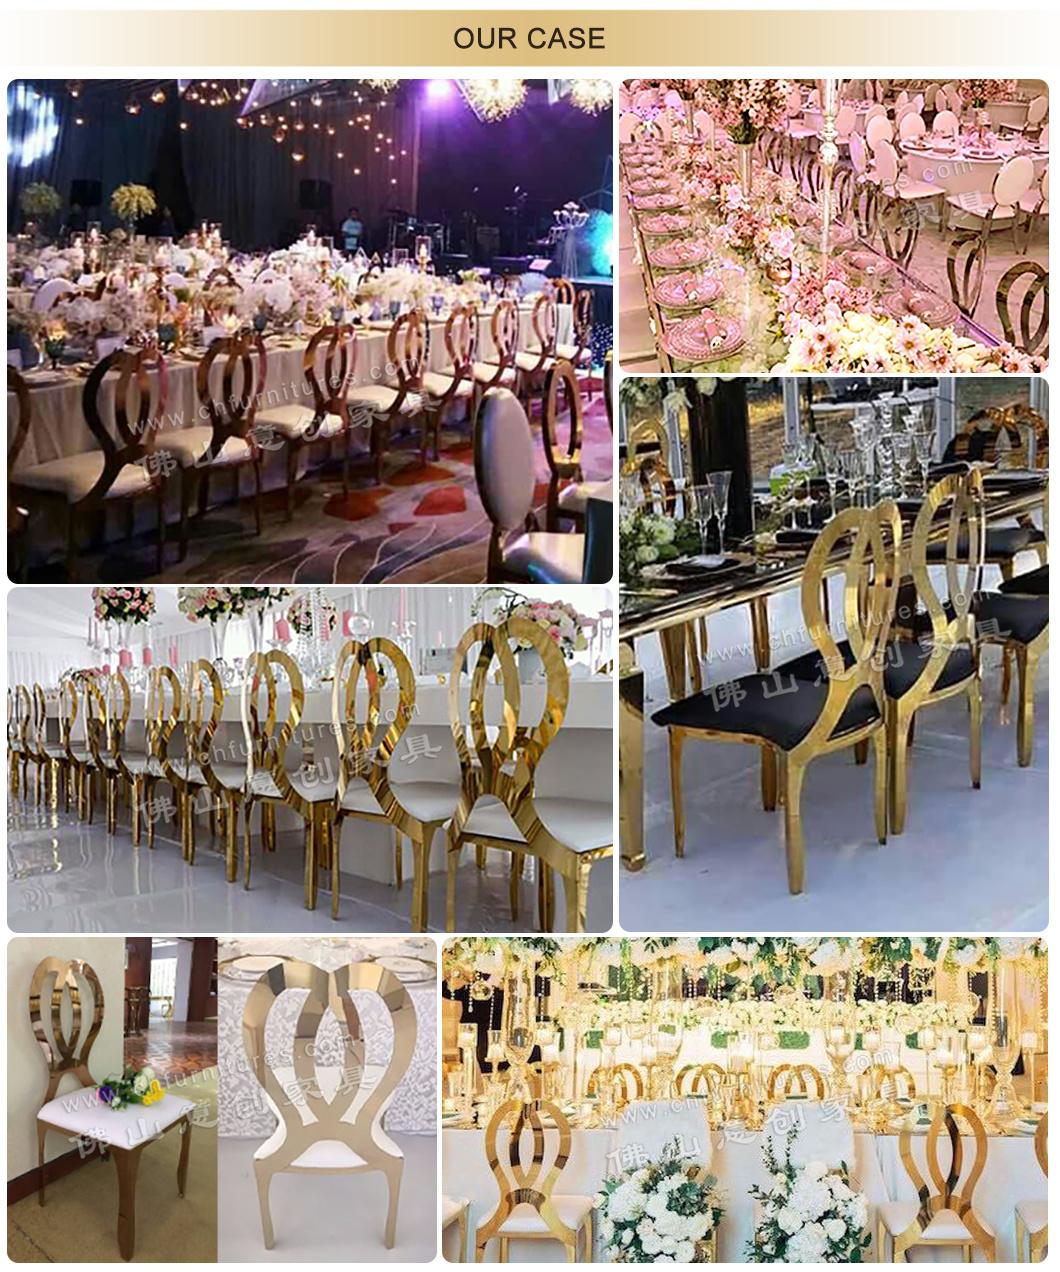 Ycx-Ss25-02 Hot Sale Wedding Dining Infinity Silver Chair Stainless Steel